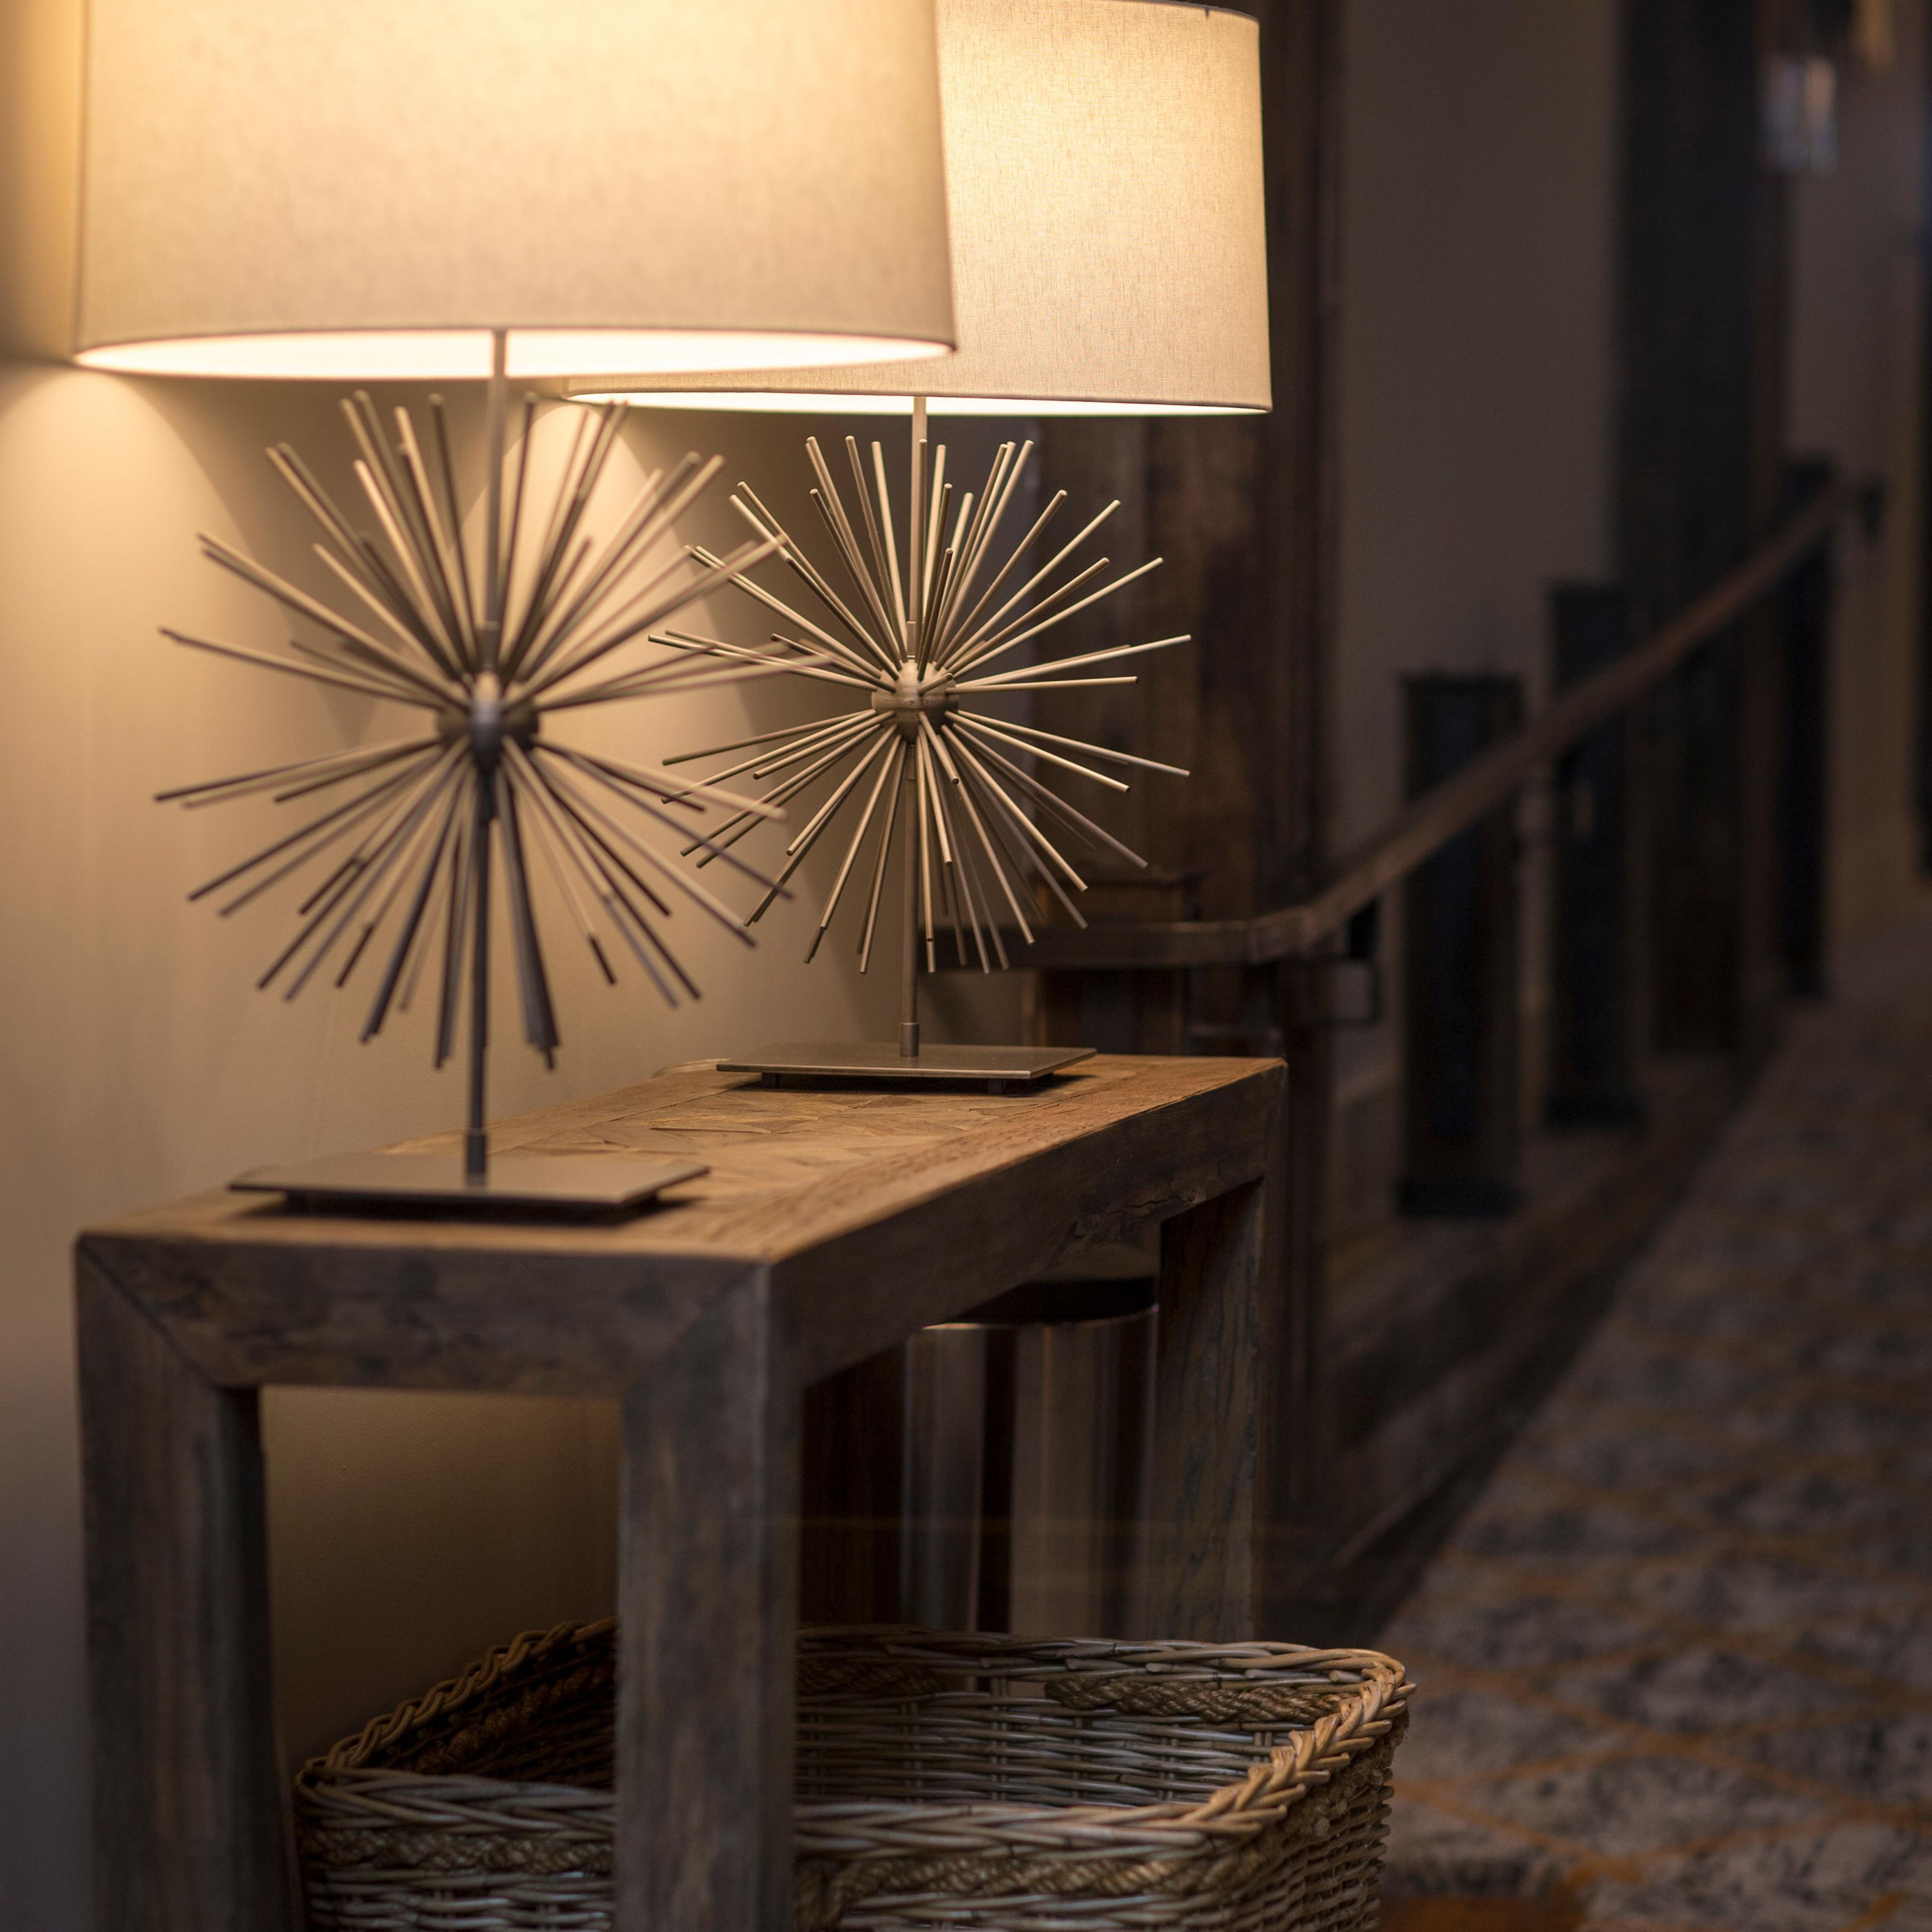 A rustic chic look can be found all over the Crowne Plaza